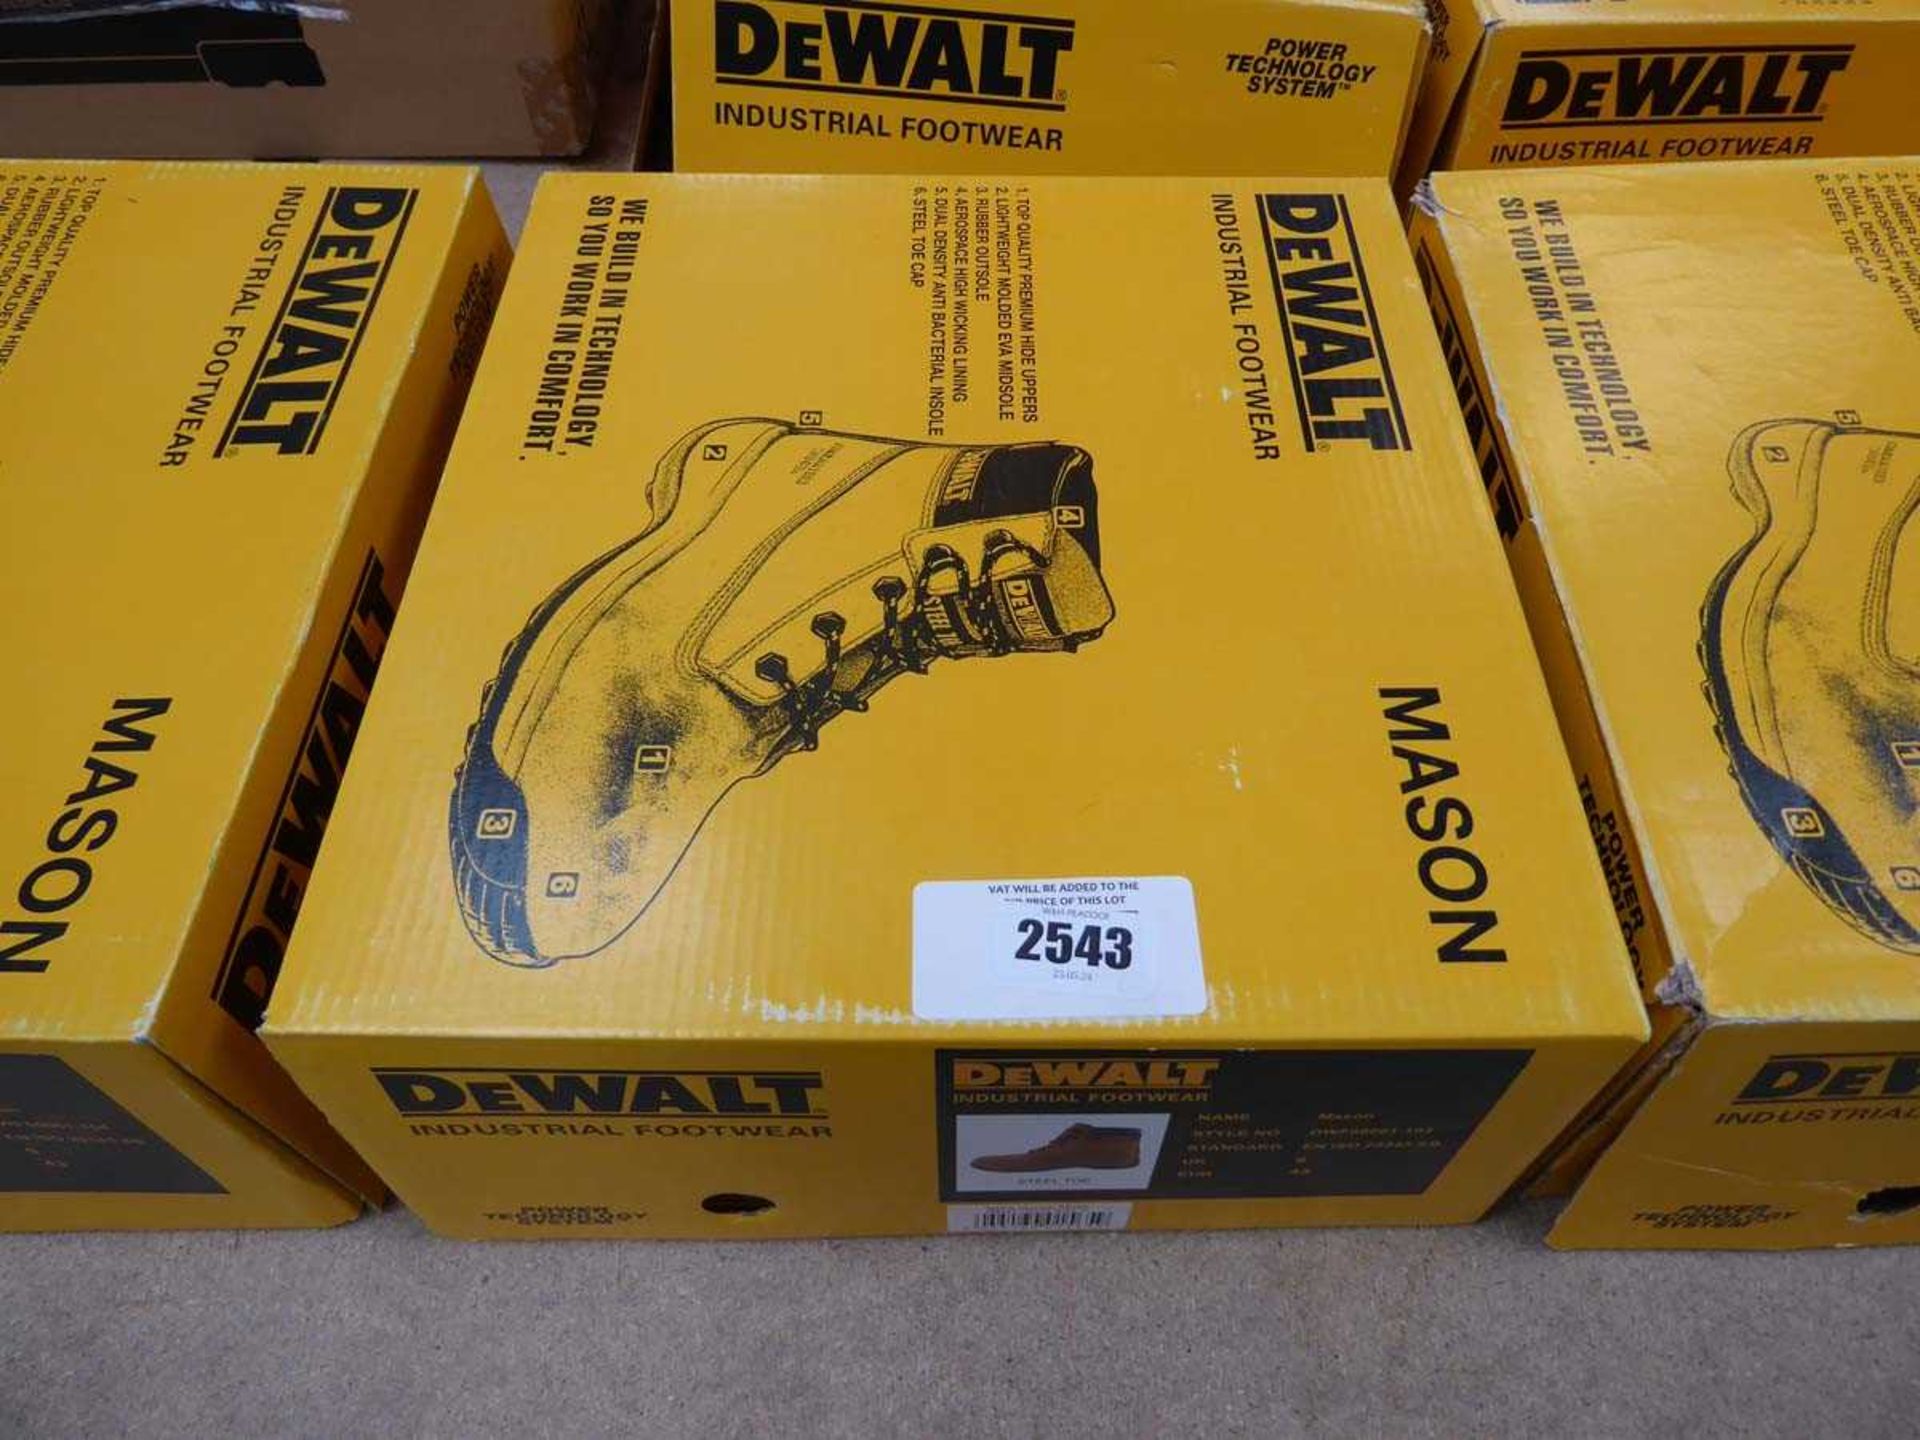 +VAT Boxed pair of DeWalt Mason steel toe safety boots in tan (size 9)